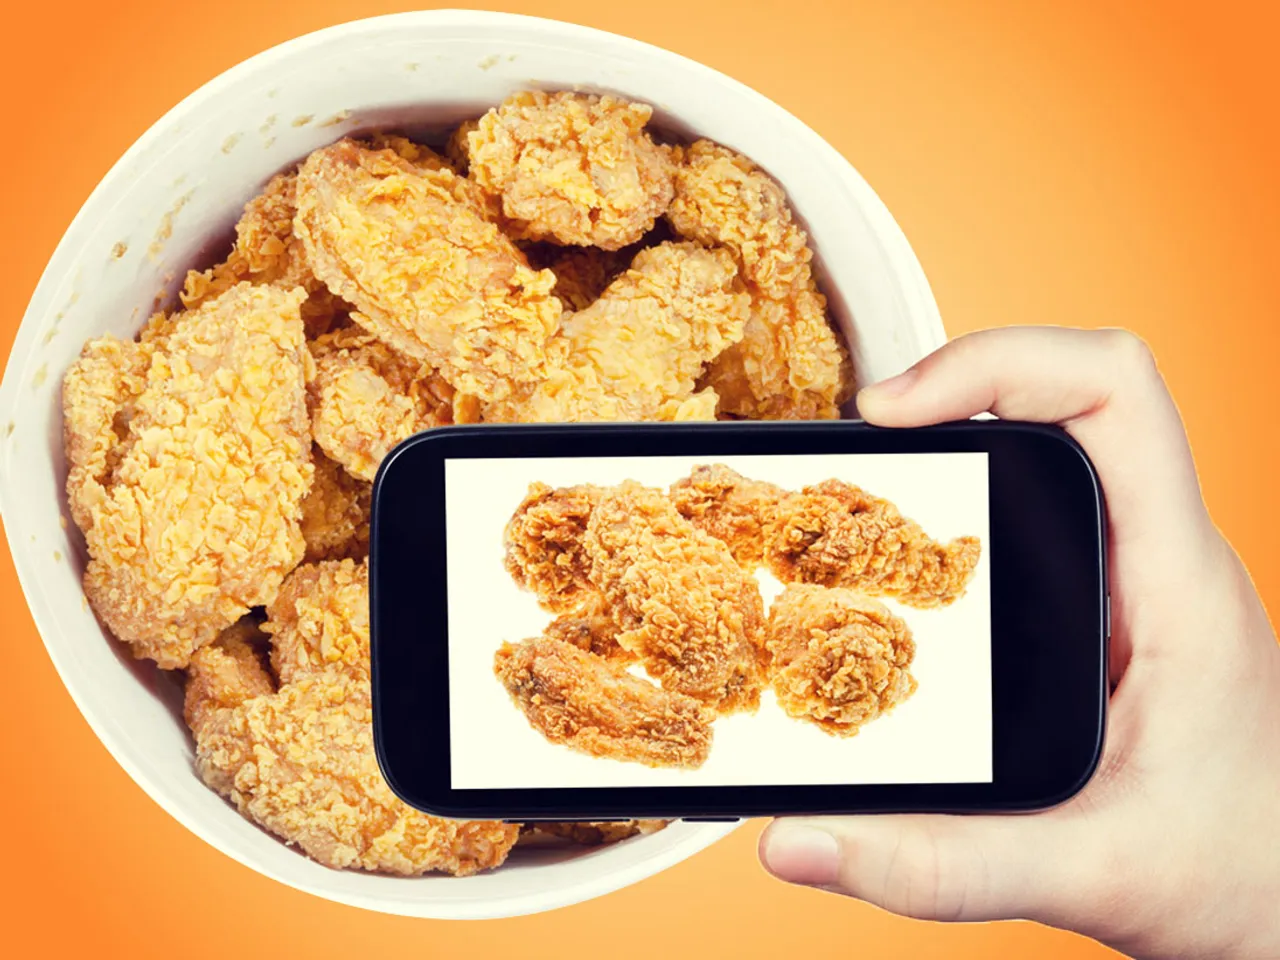 KFC’s #WattaBox takes social media by storm with cutting edge technology